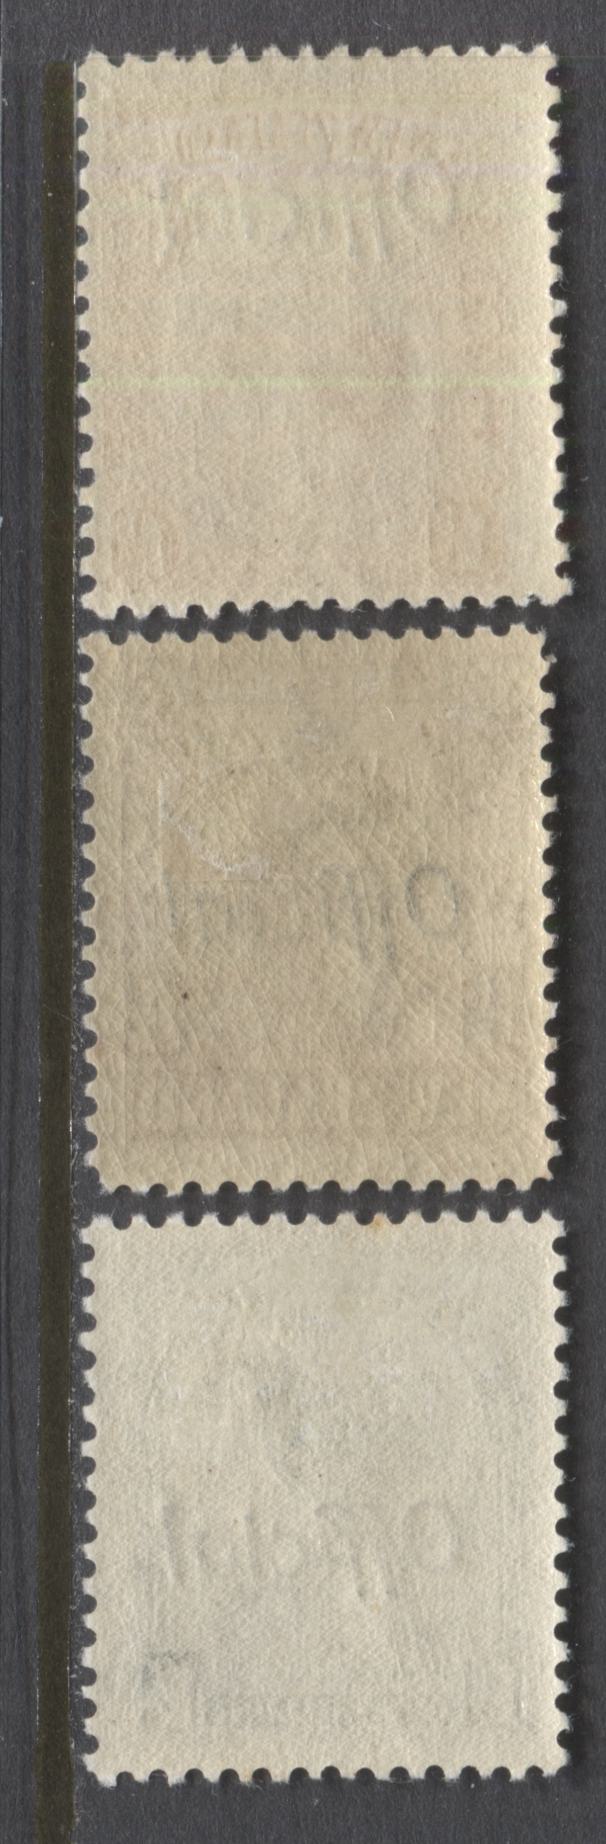 Lot 90 New Zealand SG#O115-O118 1936-1961 Pictorial Issue With Official Overprint, A Partial Fine NH and VFNH Set. Single NZ + Star Wmk, Multiple Perfs, SG. Cat. 100 GBP = $172.00